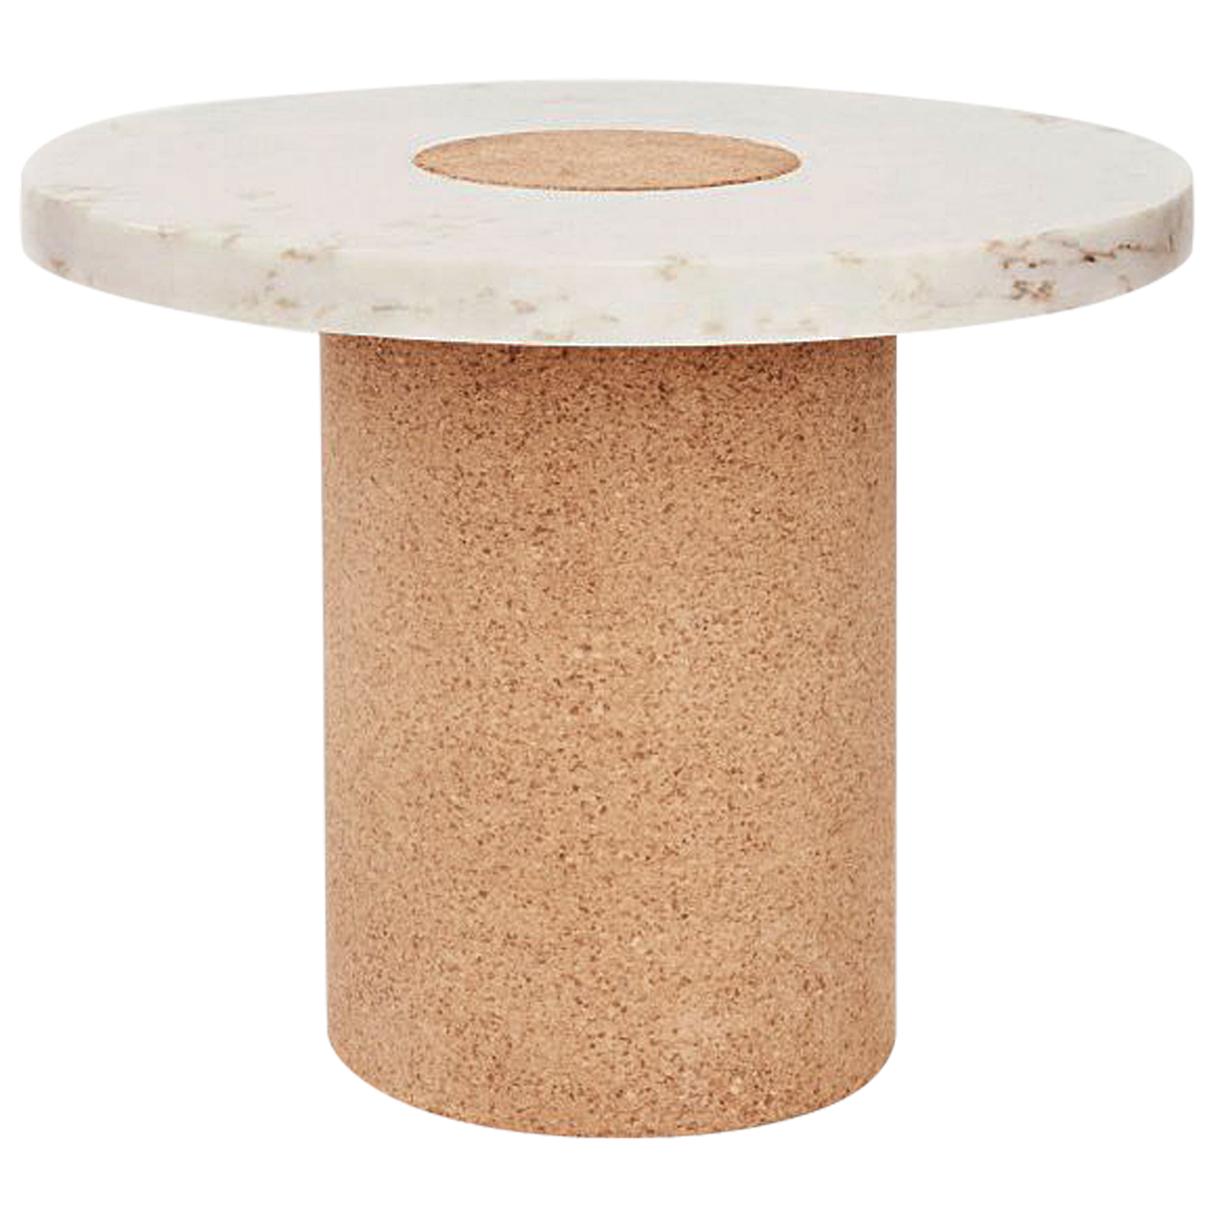 Frama Contemporary Sintra Table Large with White Marble and Natural Cork